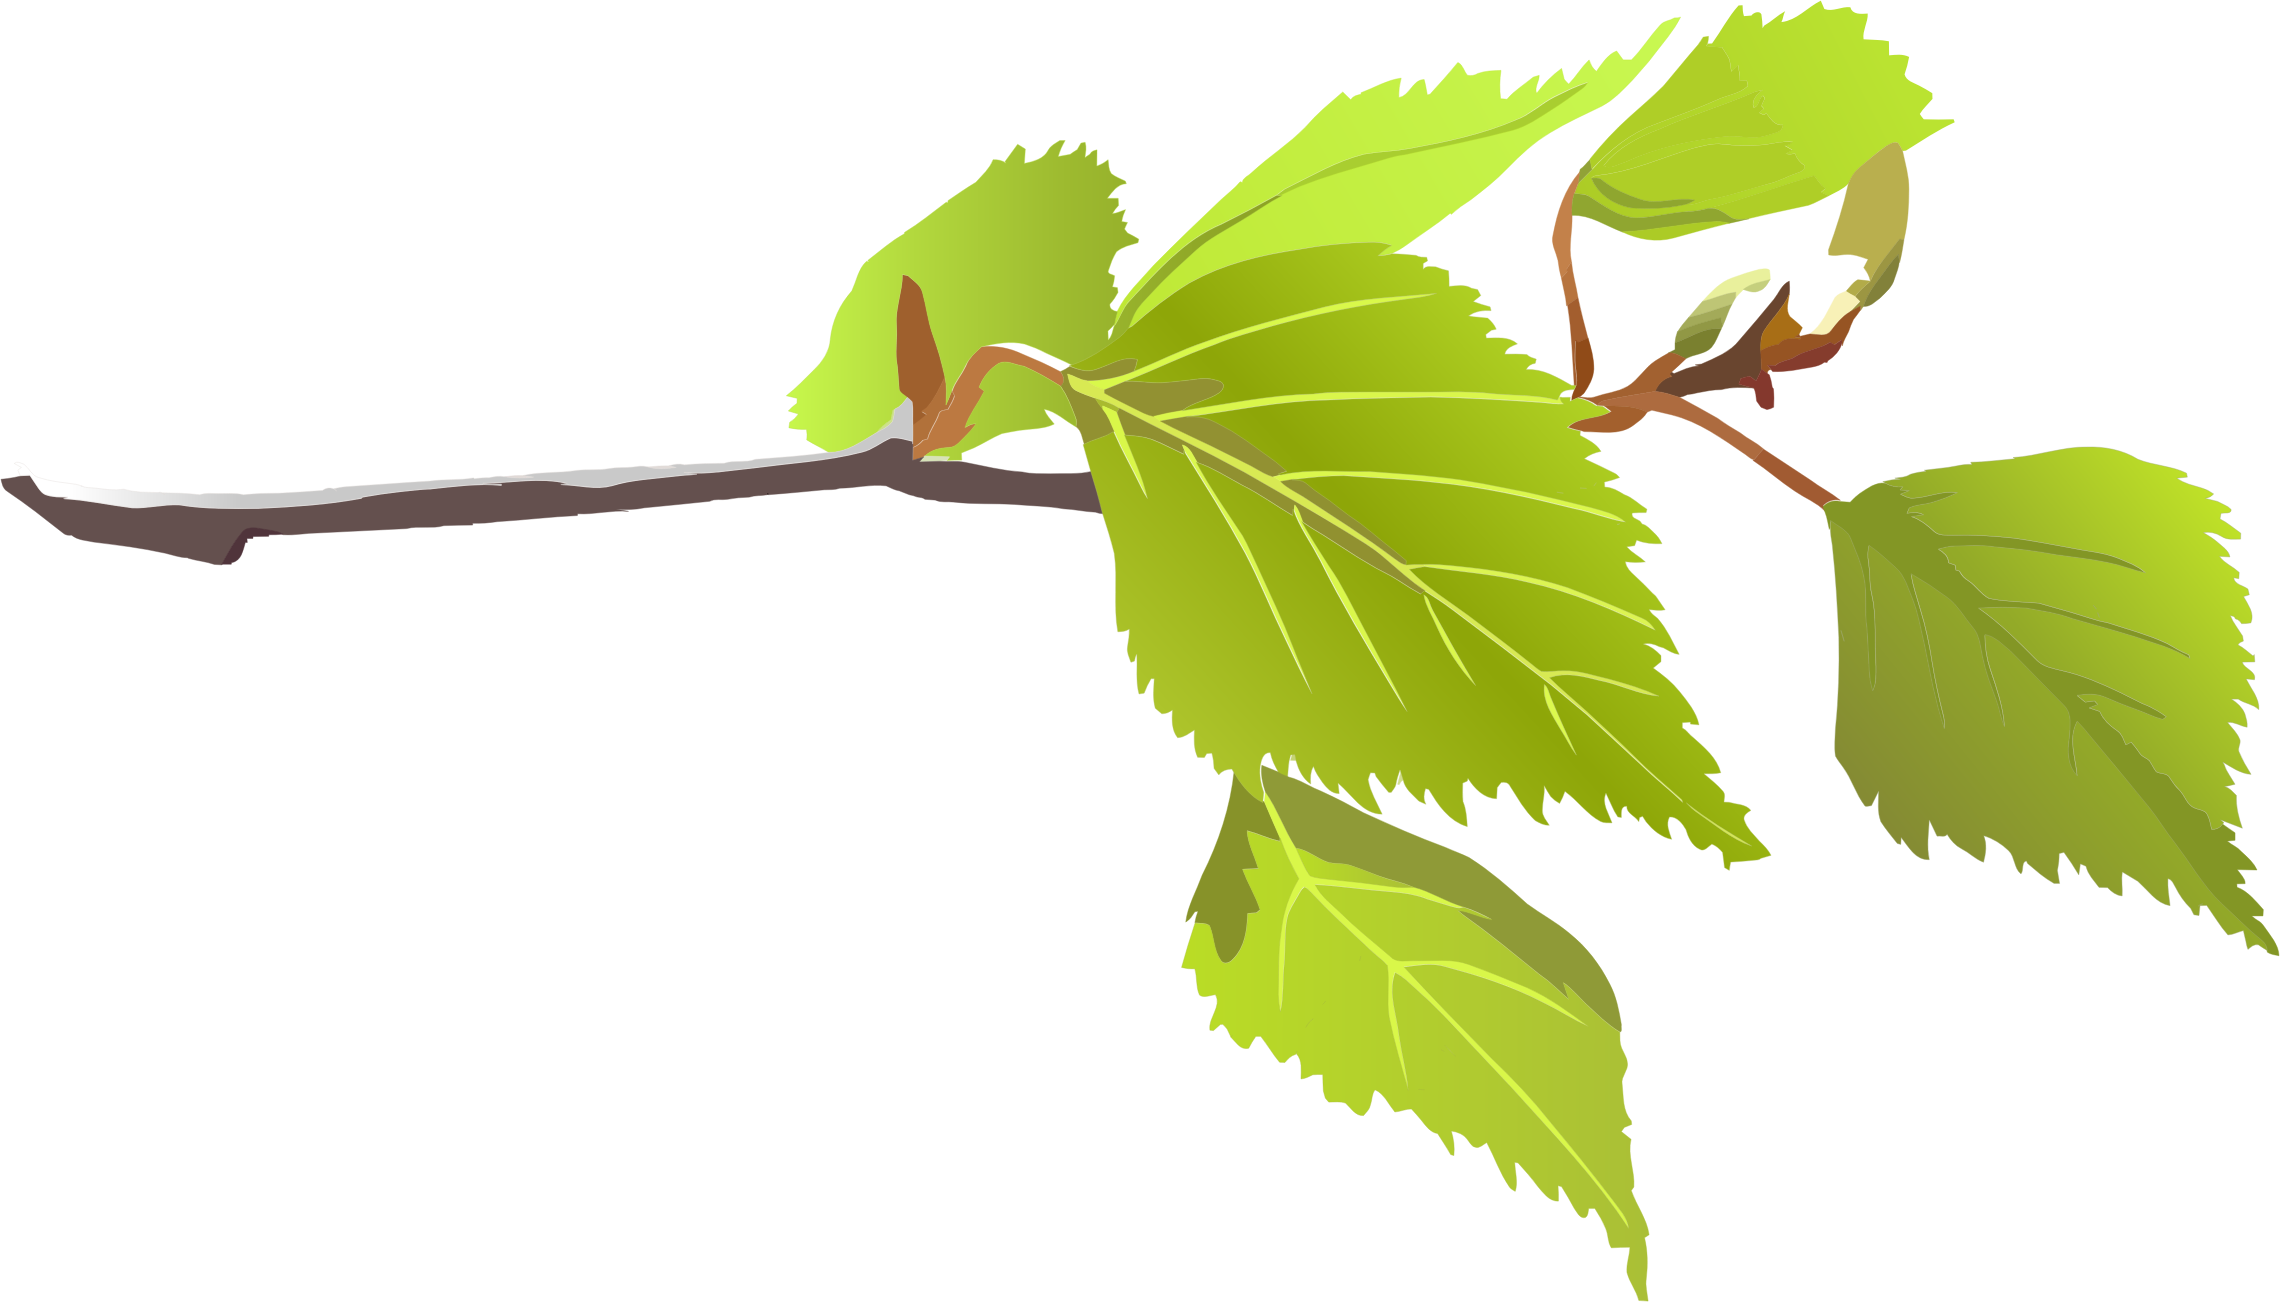 Free Branch Leaves Cliparts, Download Free Clip Art, Free